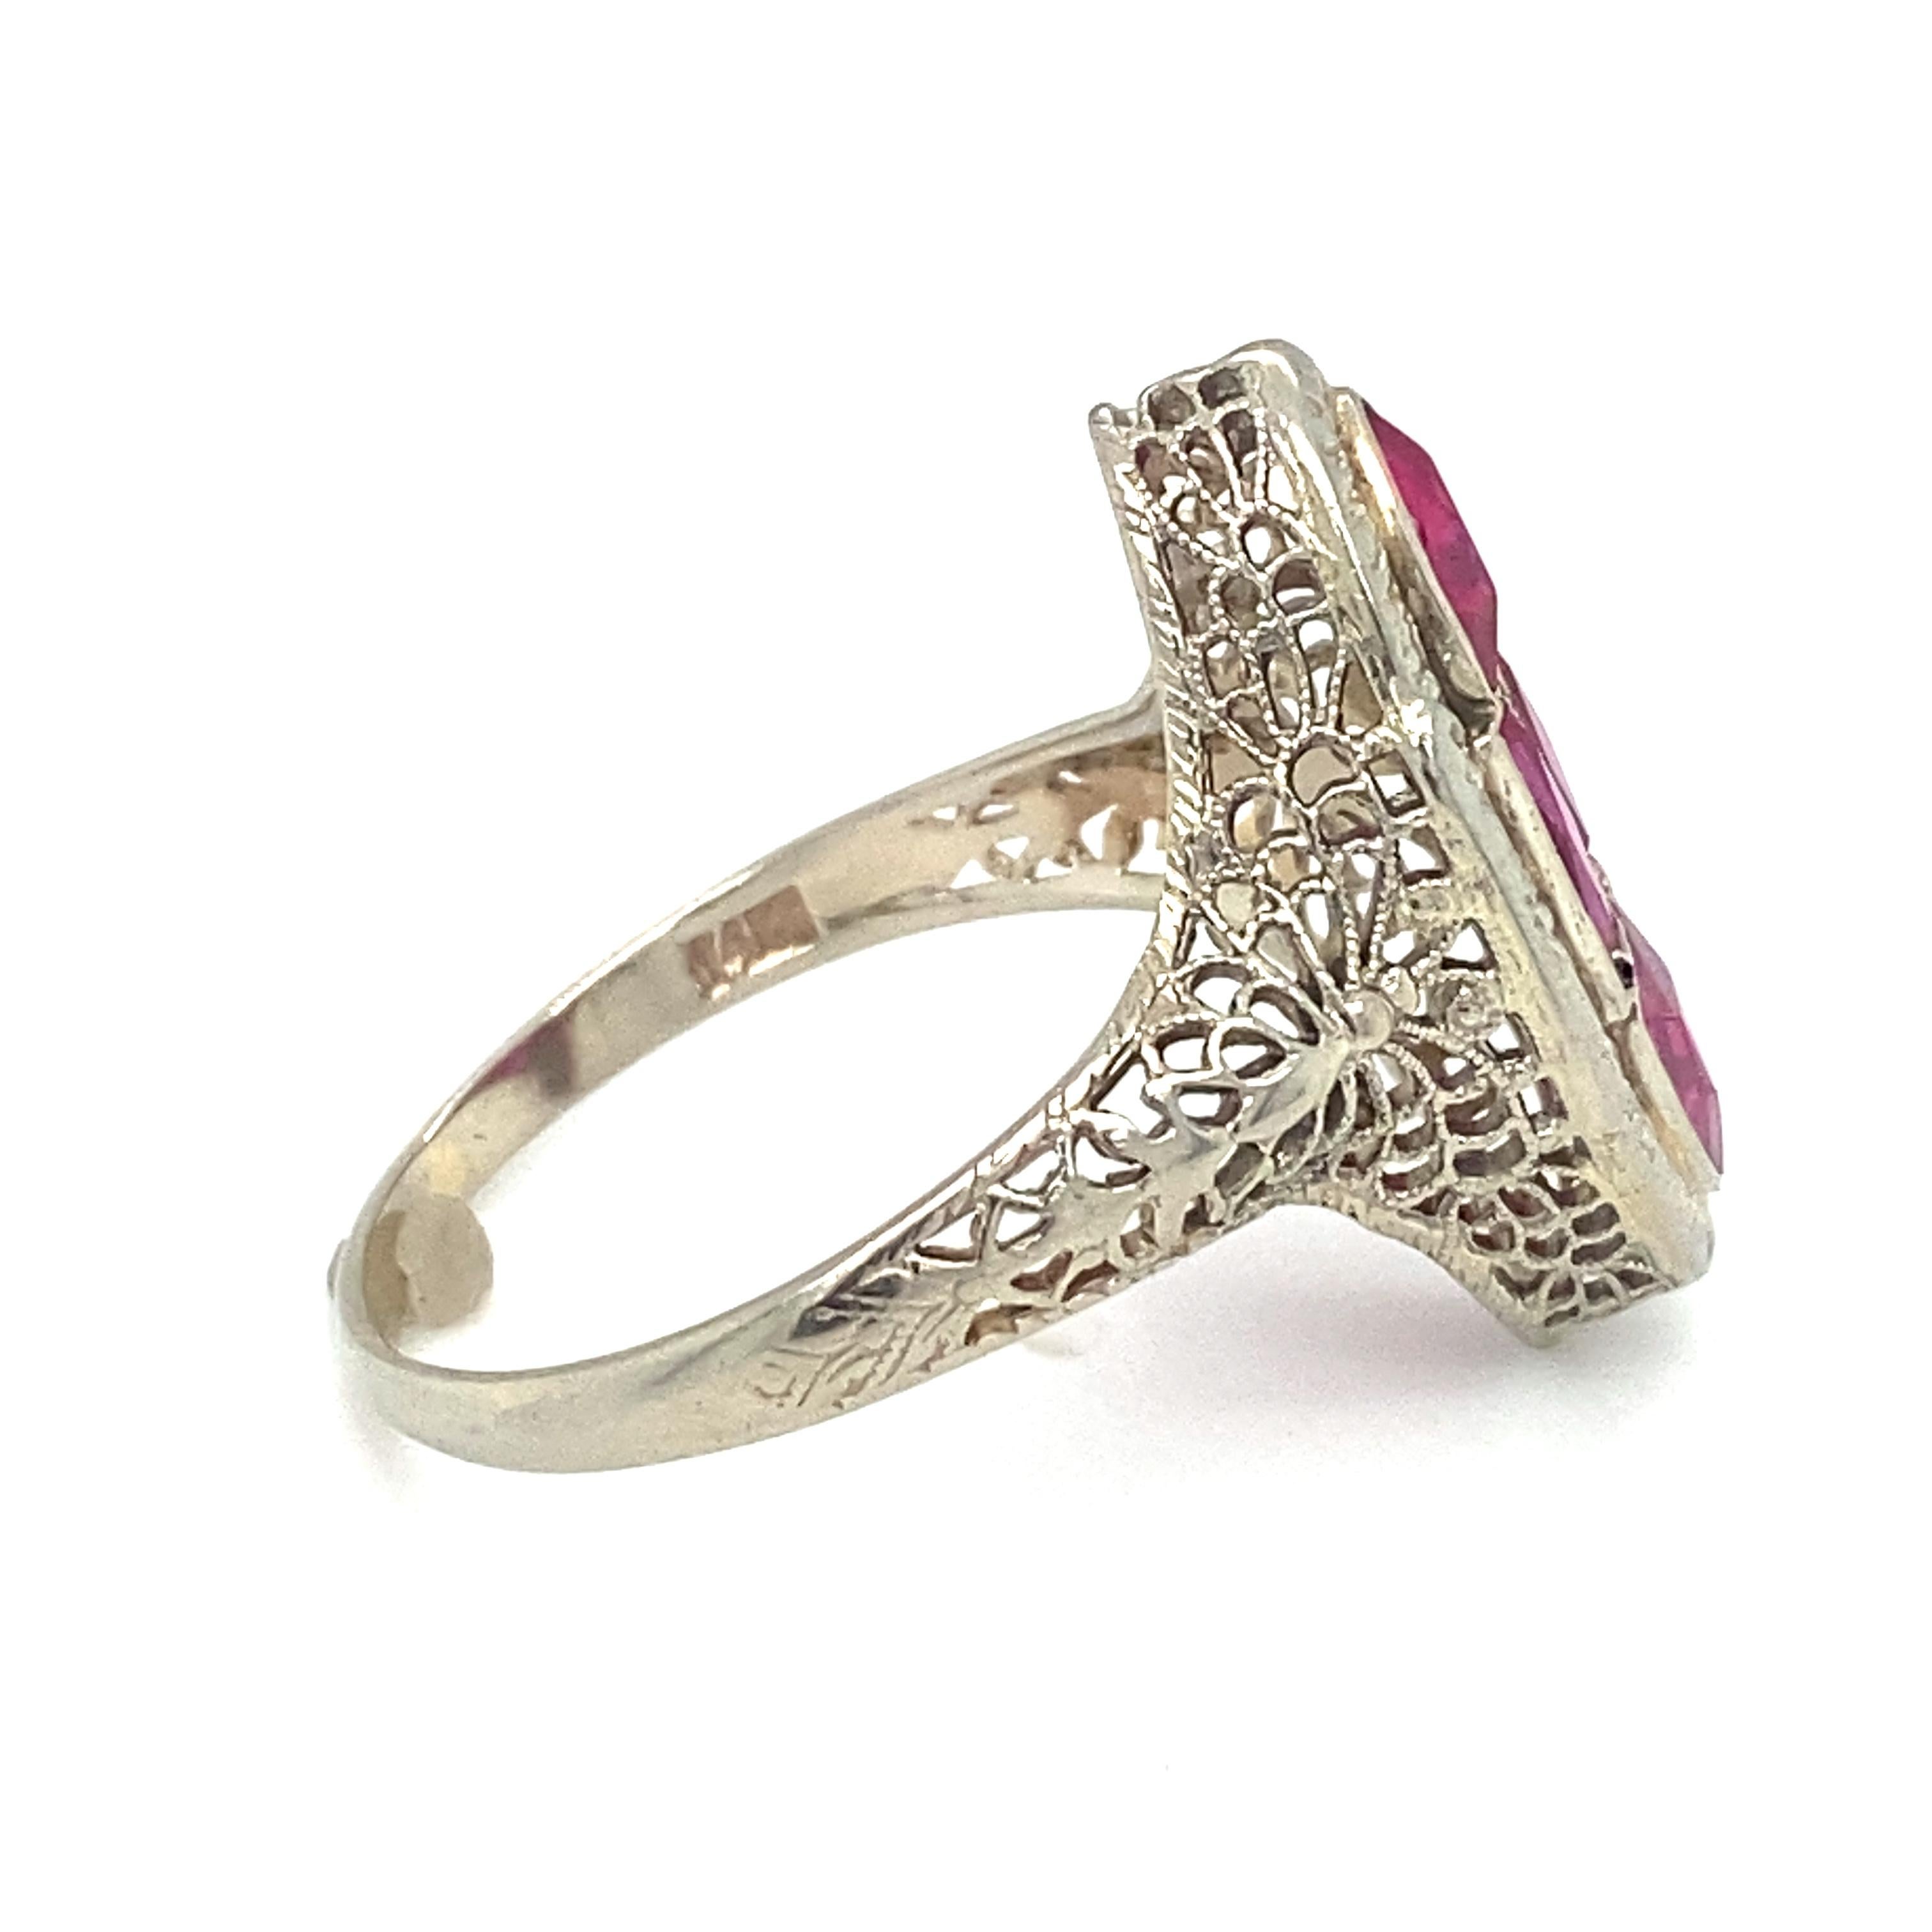 Circa 1920s Art Deco Simulated Ruby Cocktail Ring in 14 Karat White Gold For Sale 1